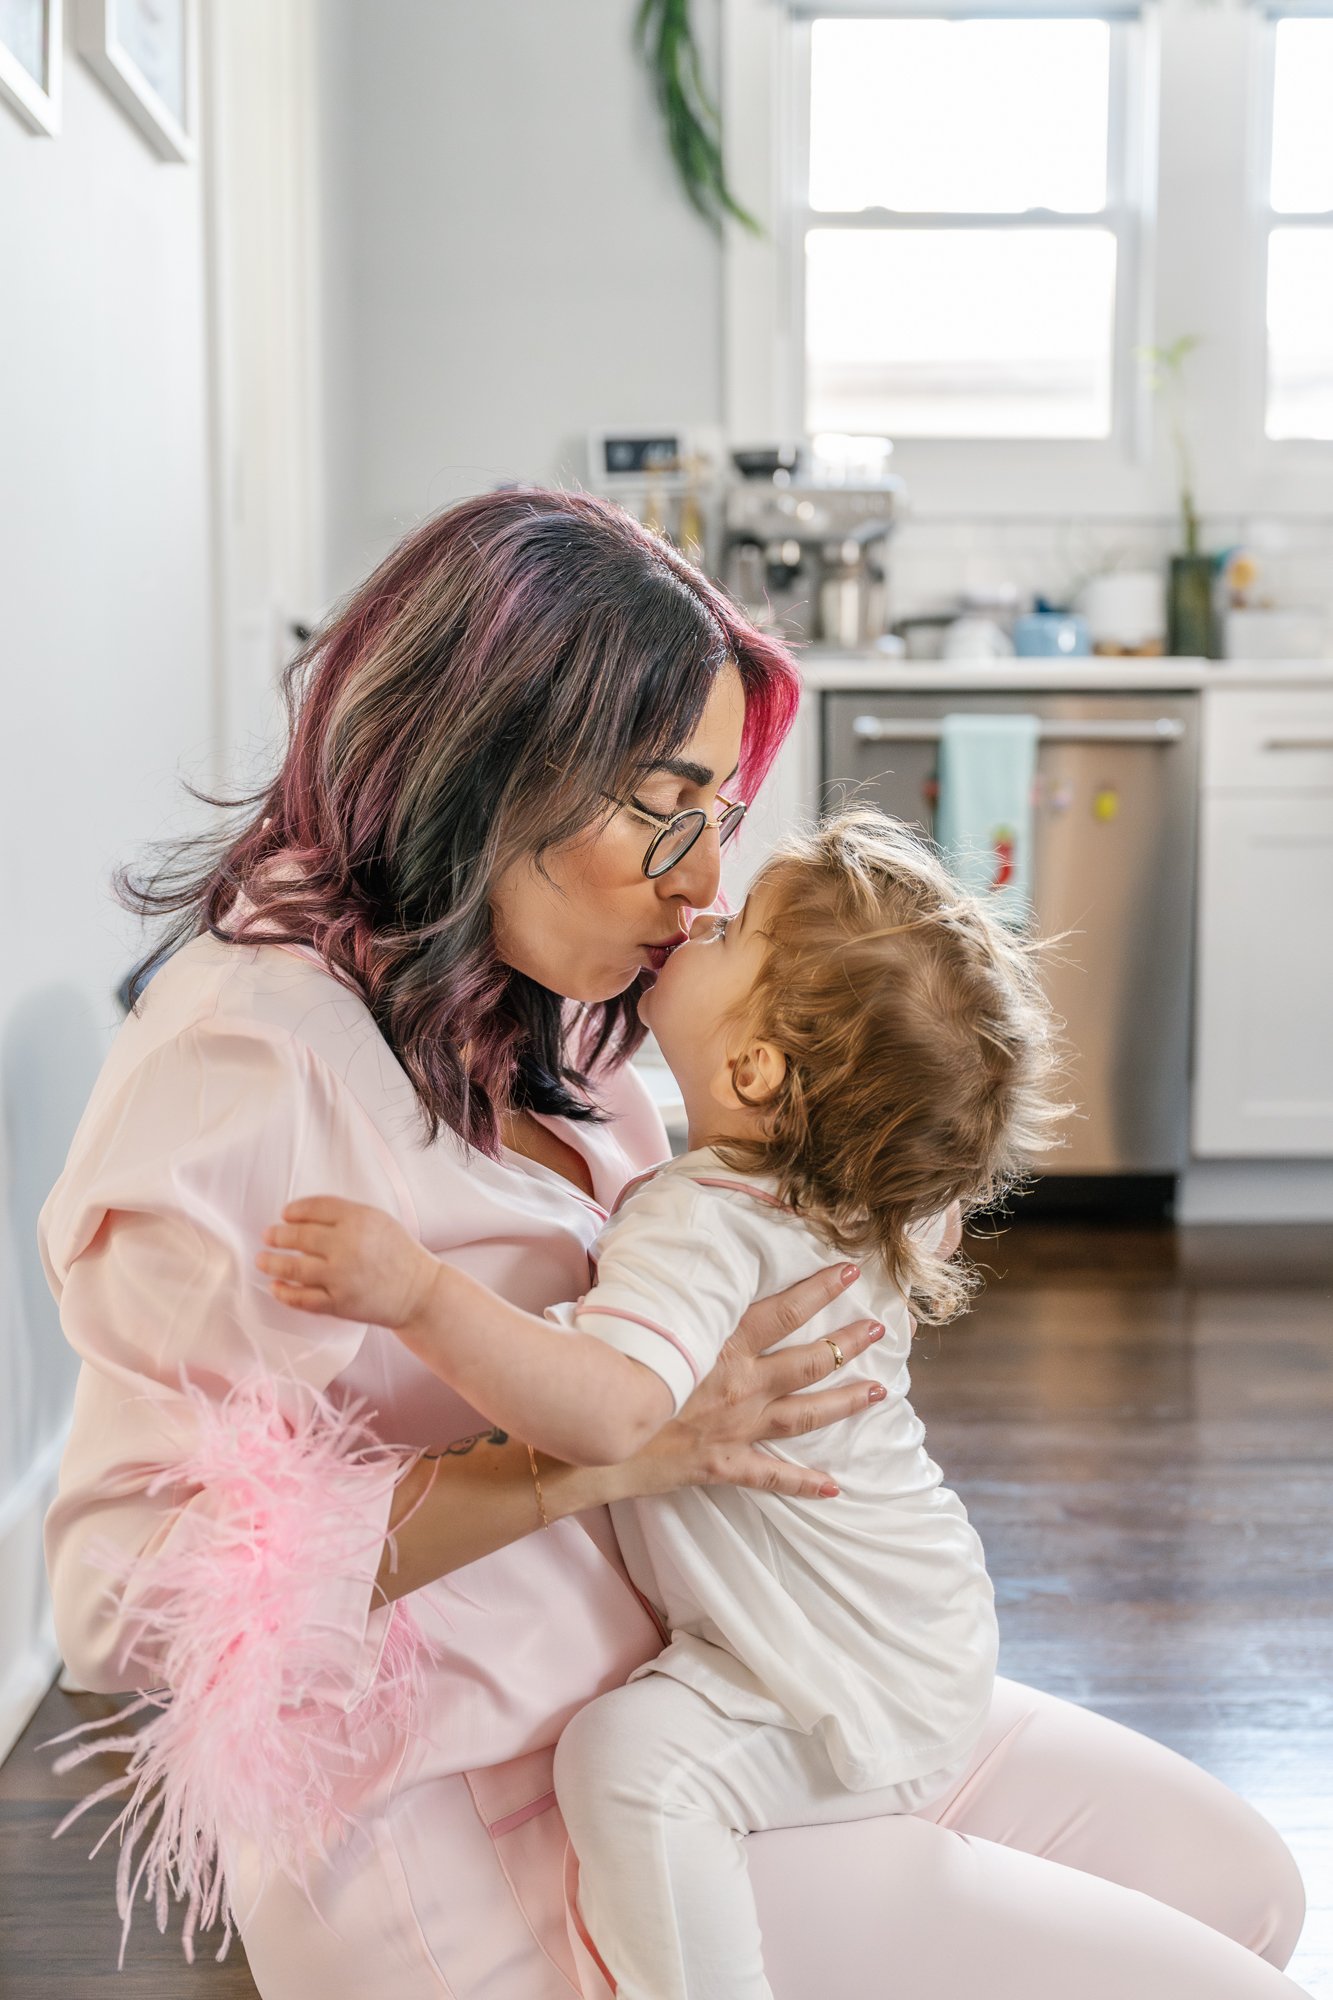   Mom kissing daughter sitting on kitchen floor during casual at home family photoshoot wearing pajamas. Casual family photo inspiration#EssexCountyFamilyPhotographer #MorrisCountyFamilyPhotographer #NorthernNewJerseyFamilyPhotographer #ManhattanFami